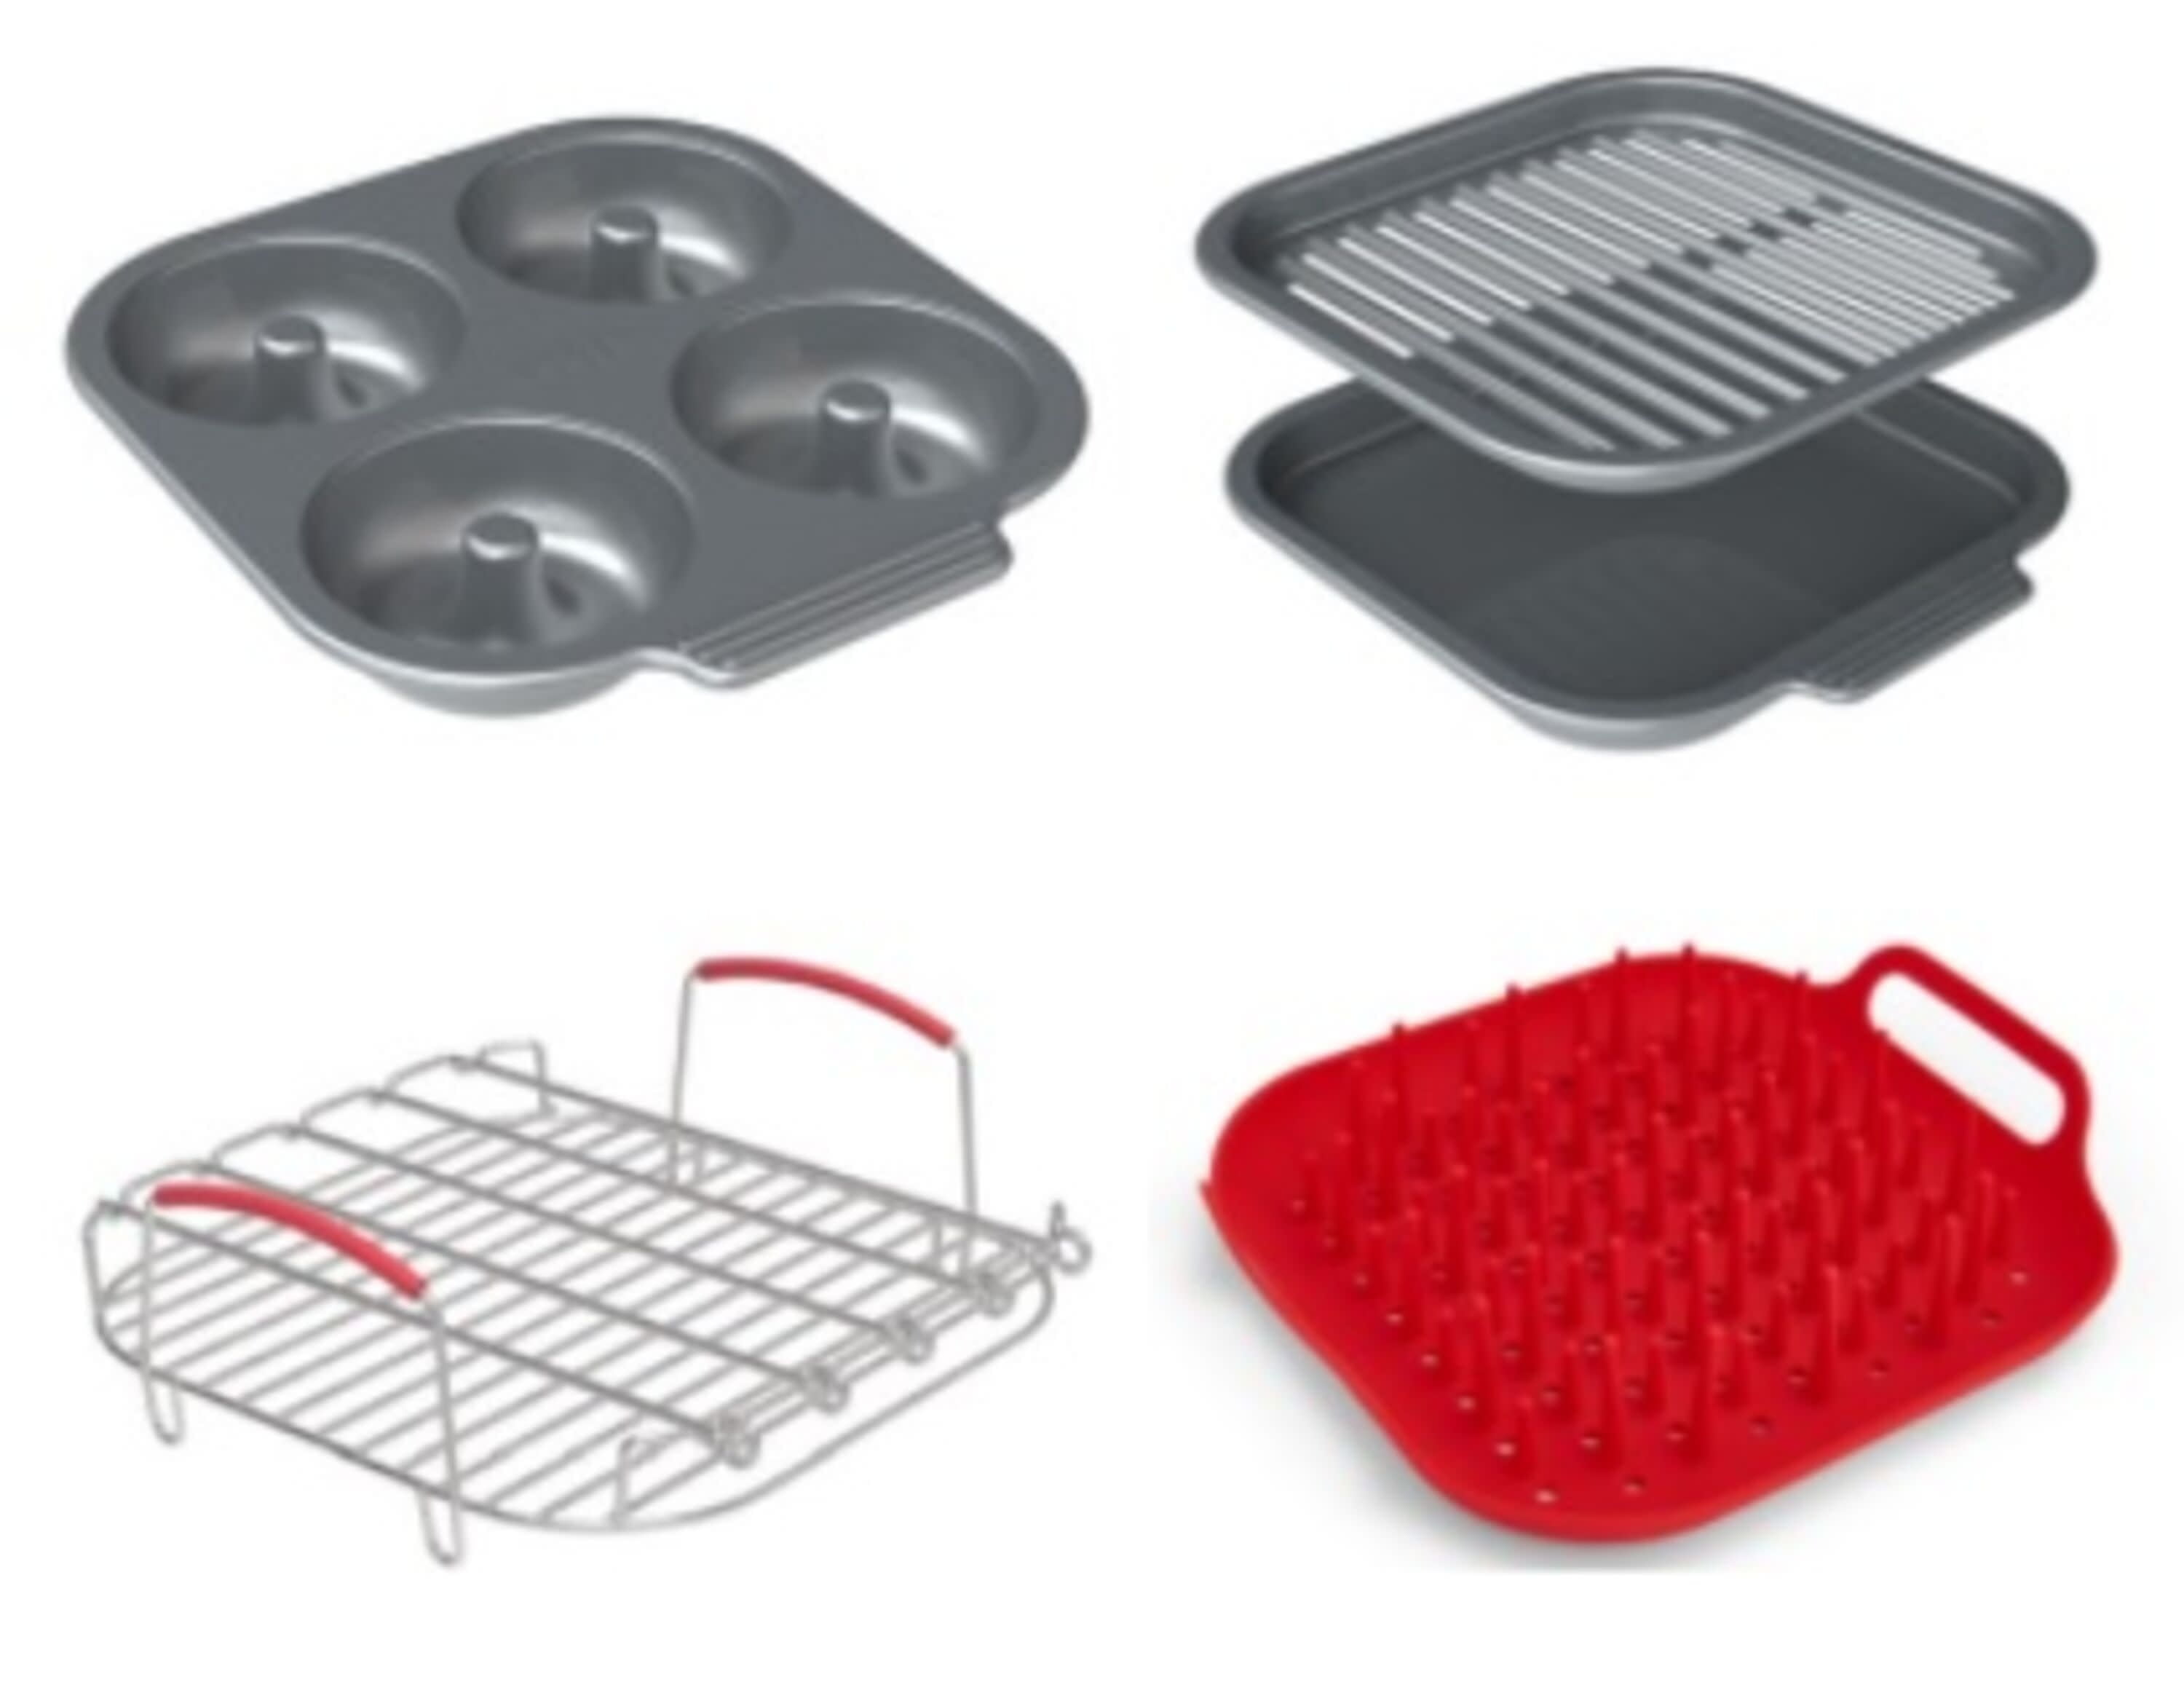 Instant Pot Air Fryer Silicone Pronged Tray